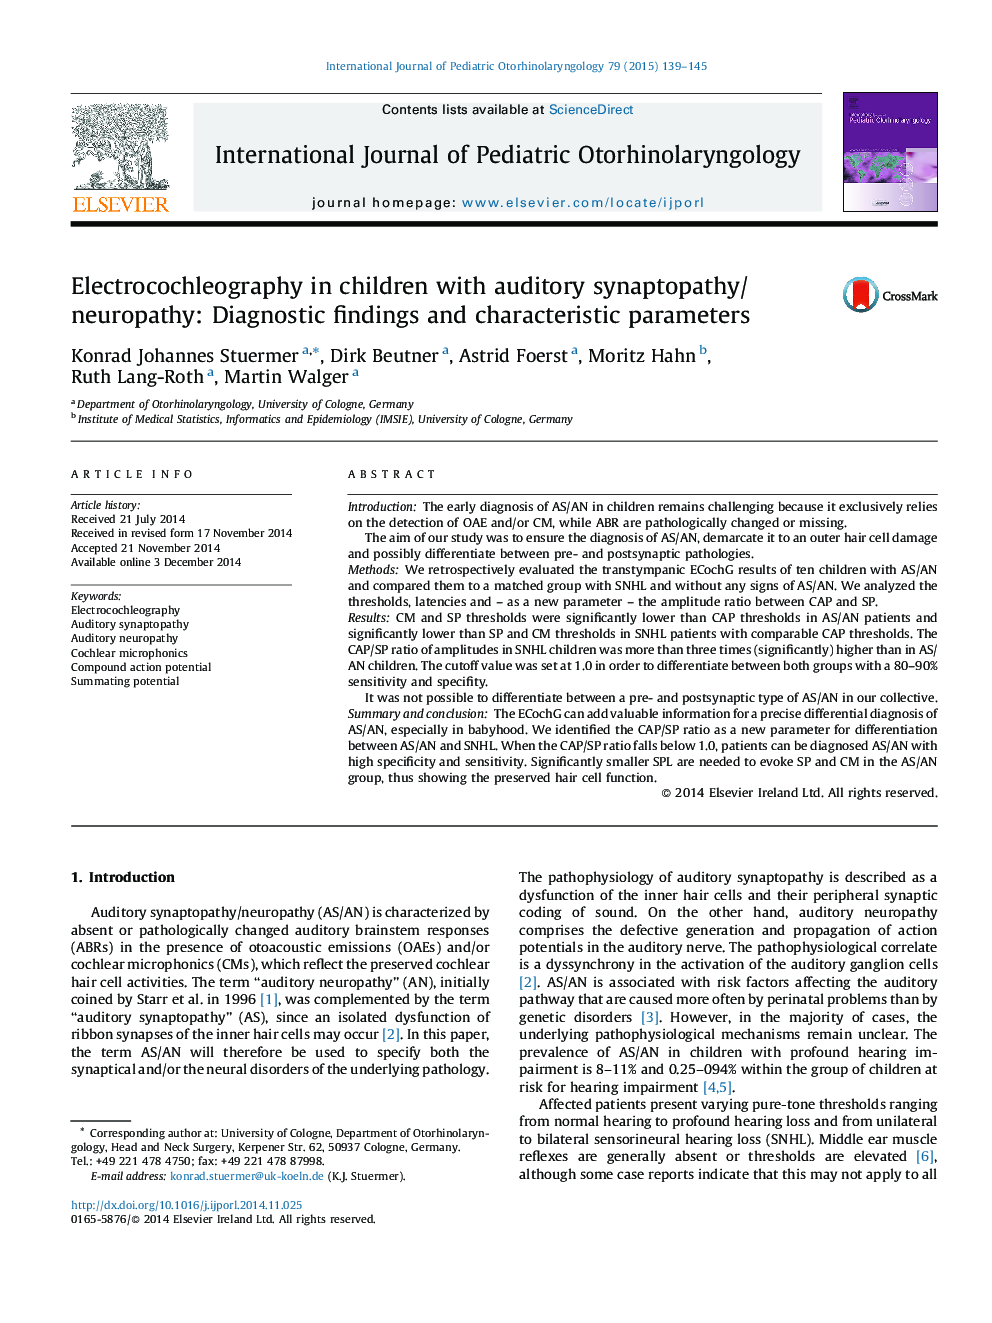 Electrocochleography in children with auditory synaptopathy/neuropathy: Diagnostic findings and characteristic parameters